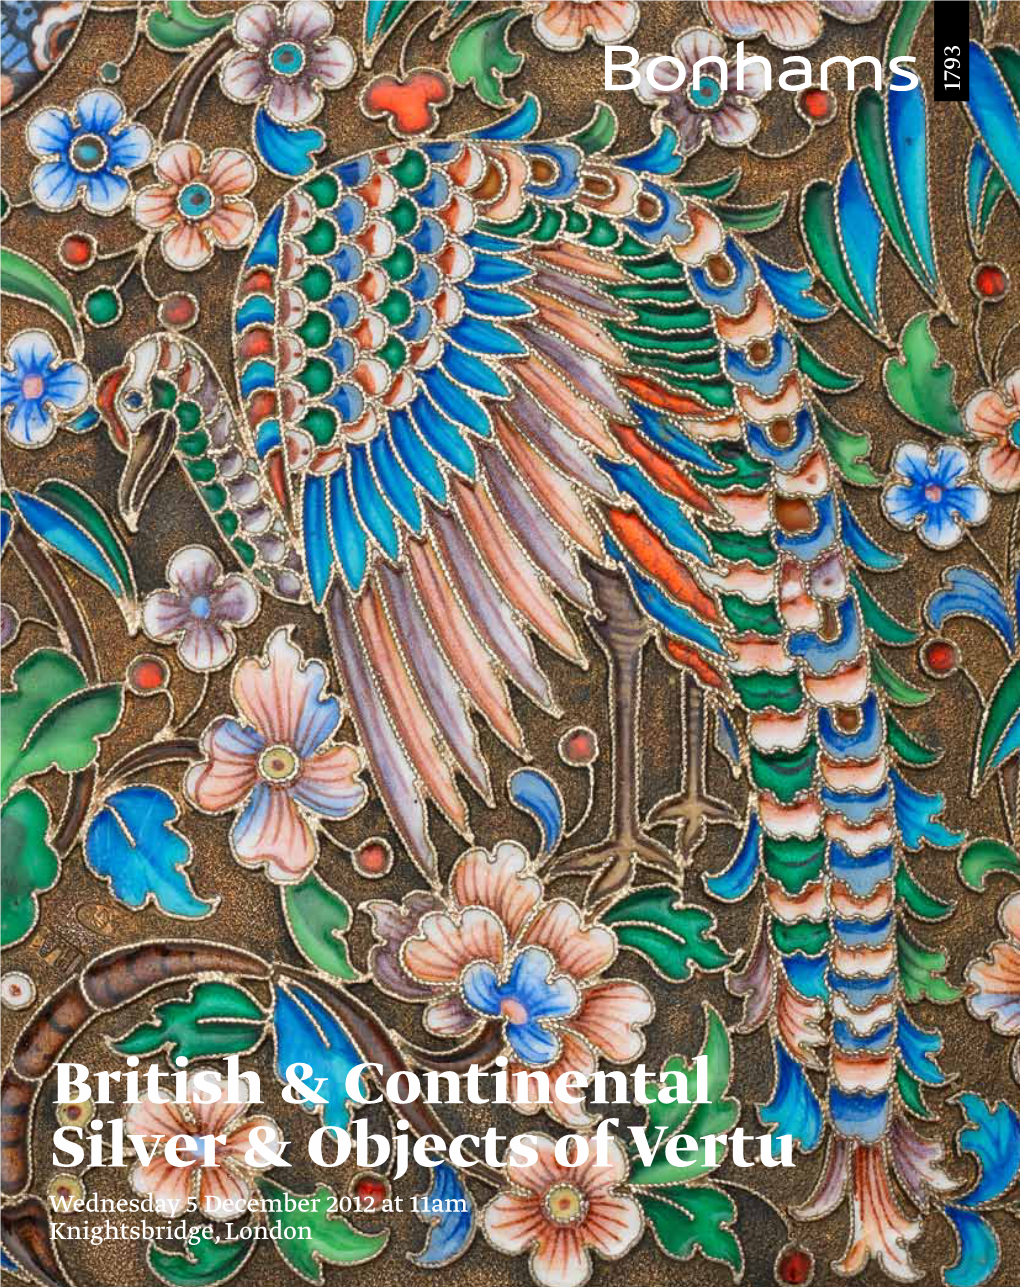 British & Continental Silver & Objects of Vertu